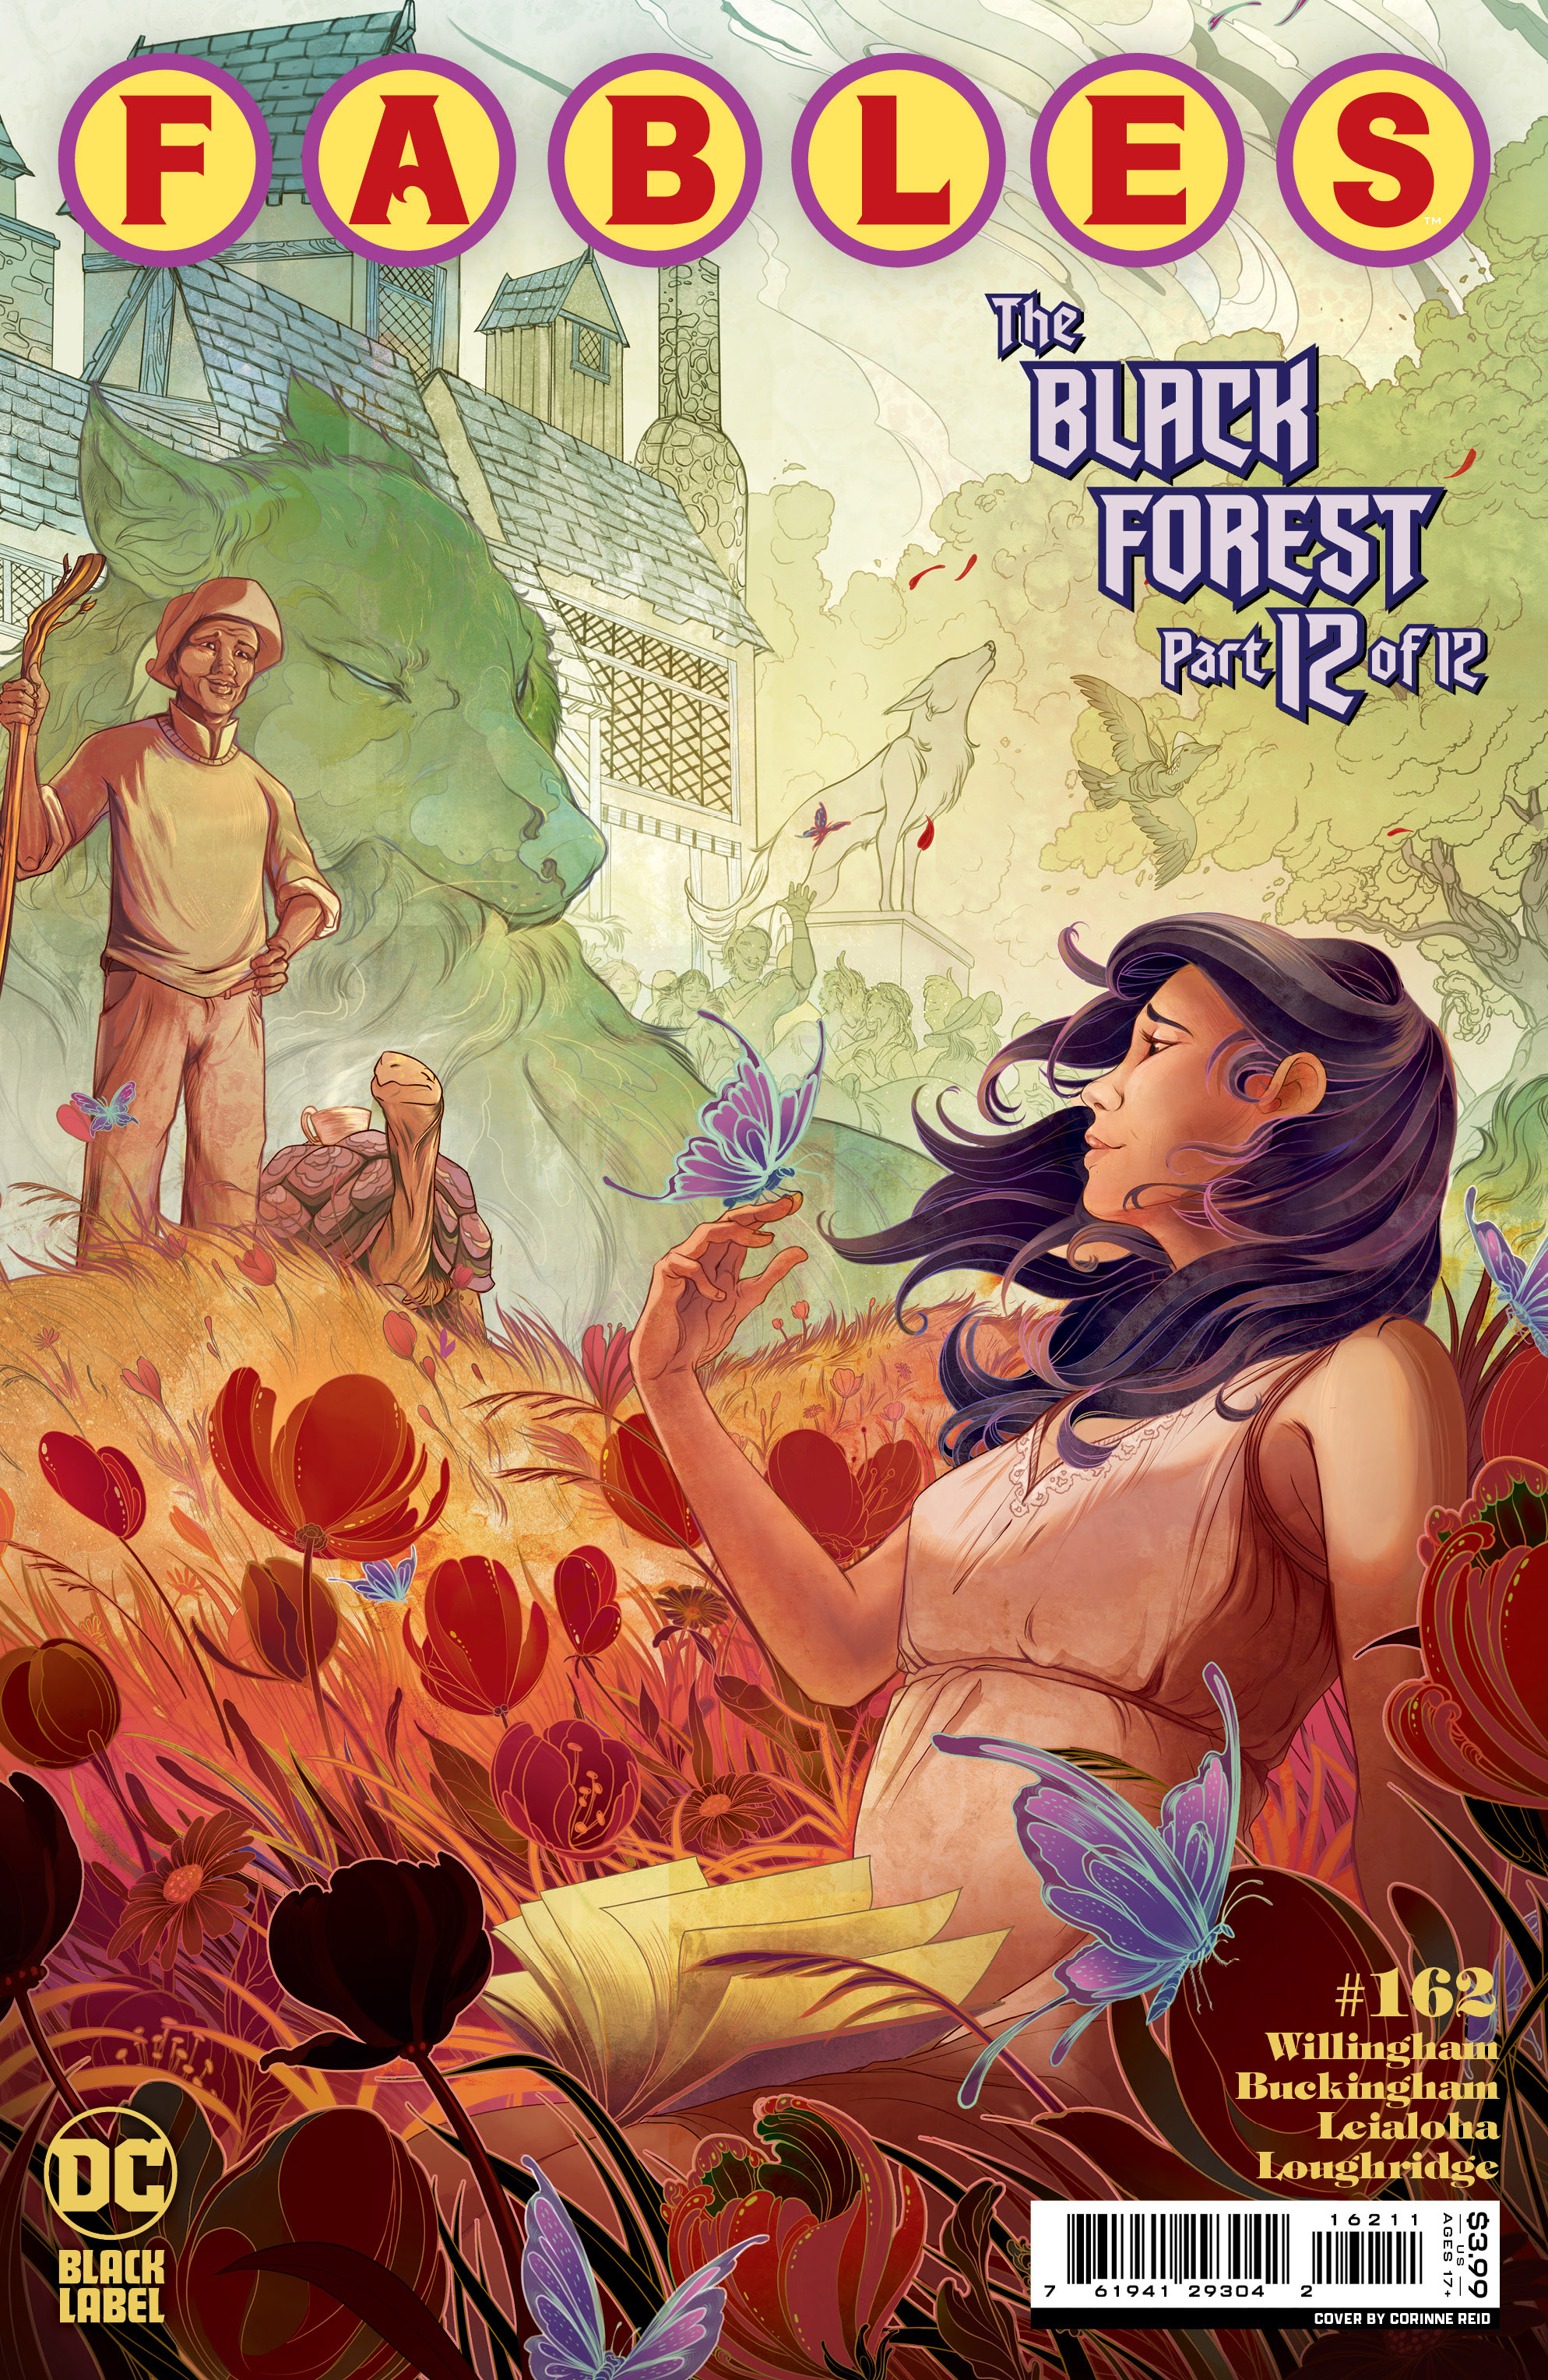 Fables #162 (Of 162) Cover A Corinne Reid (Mature)